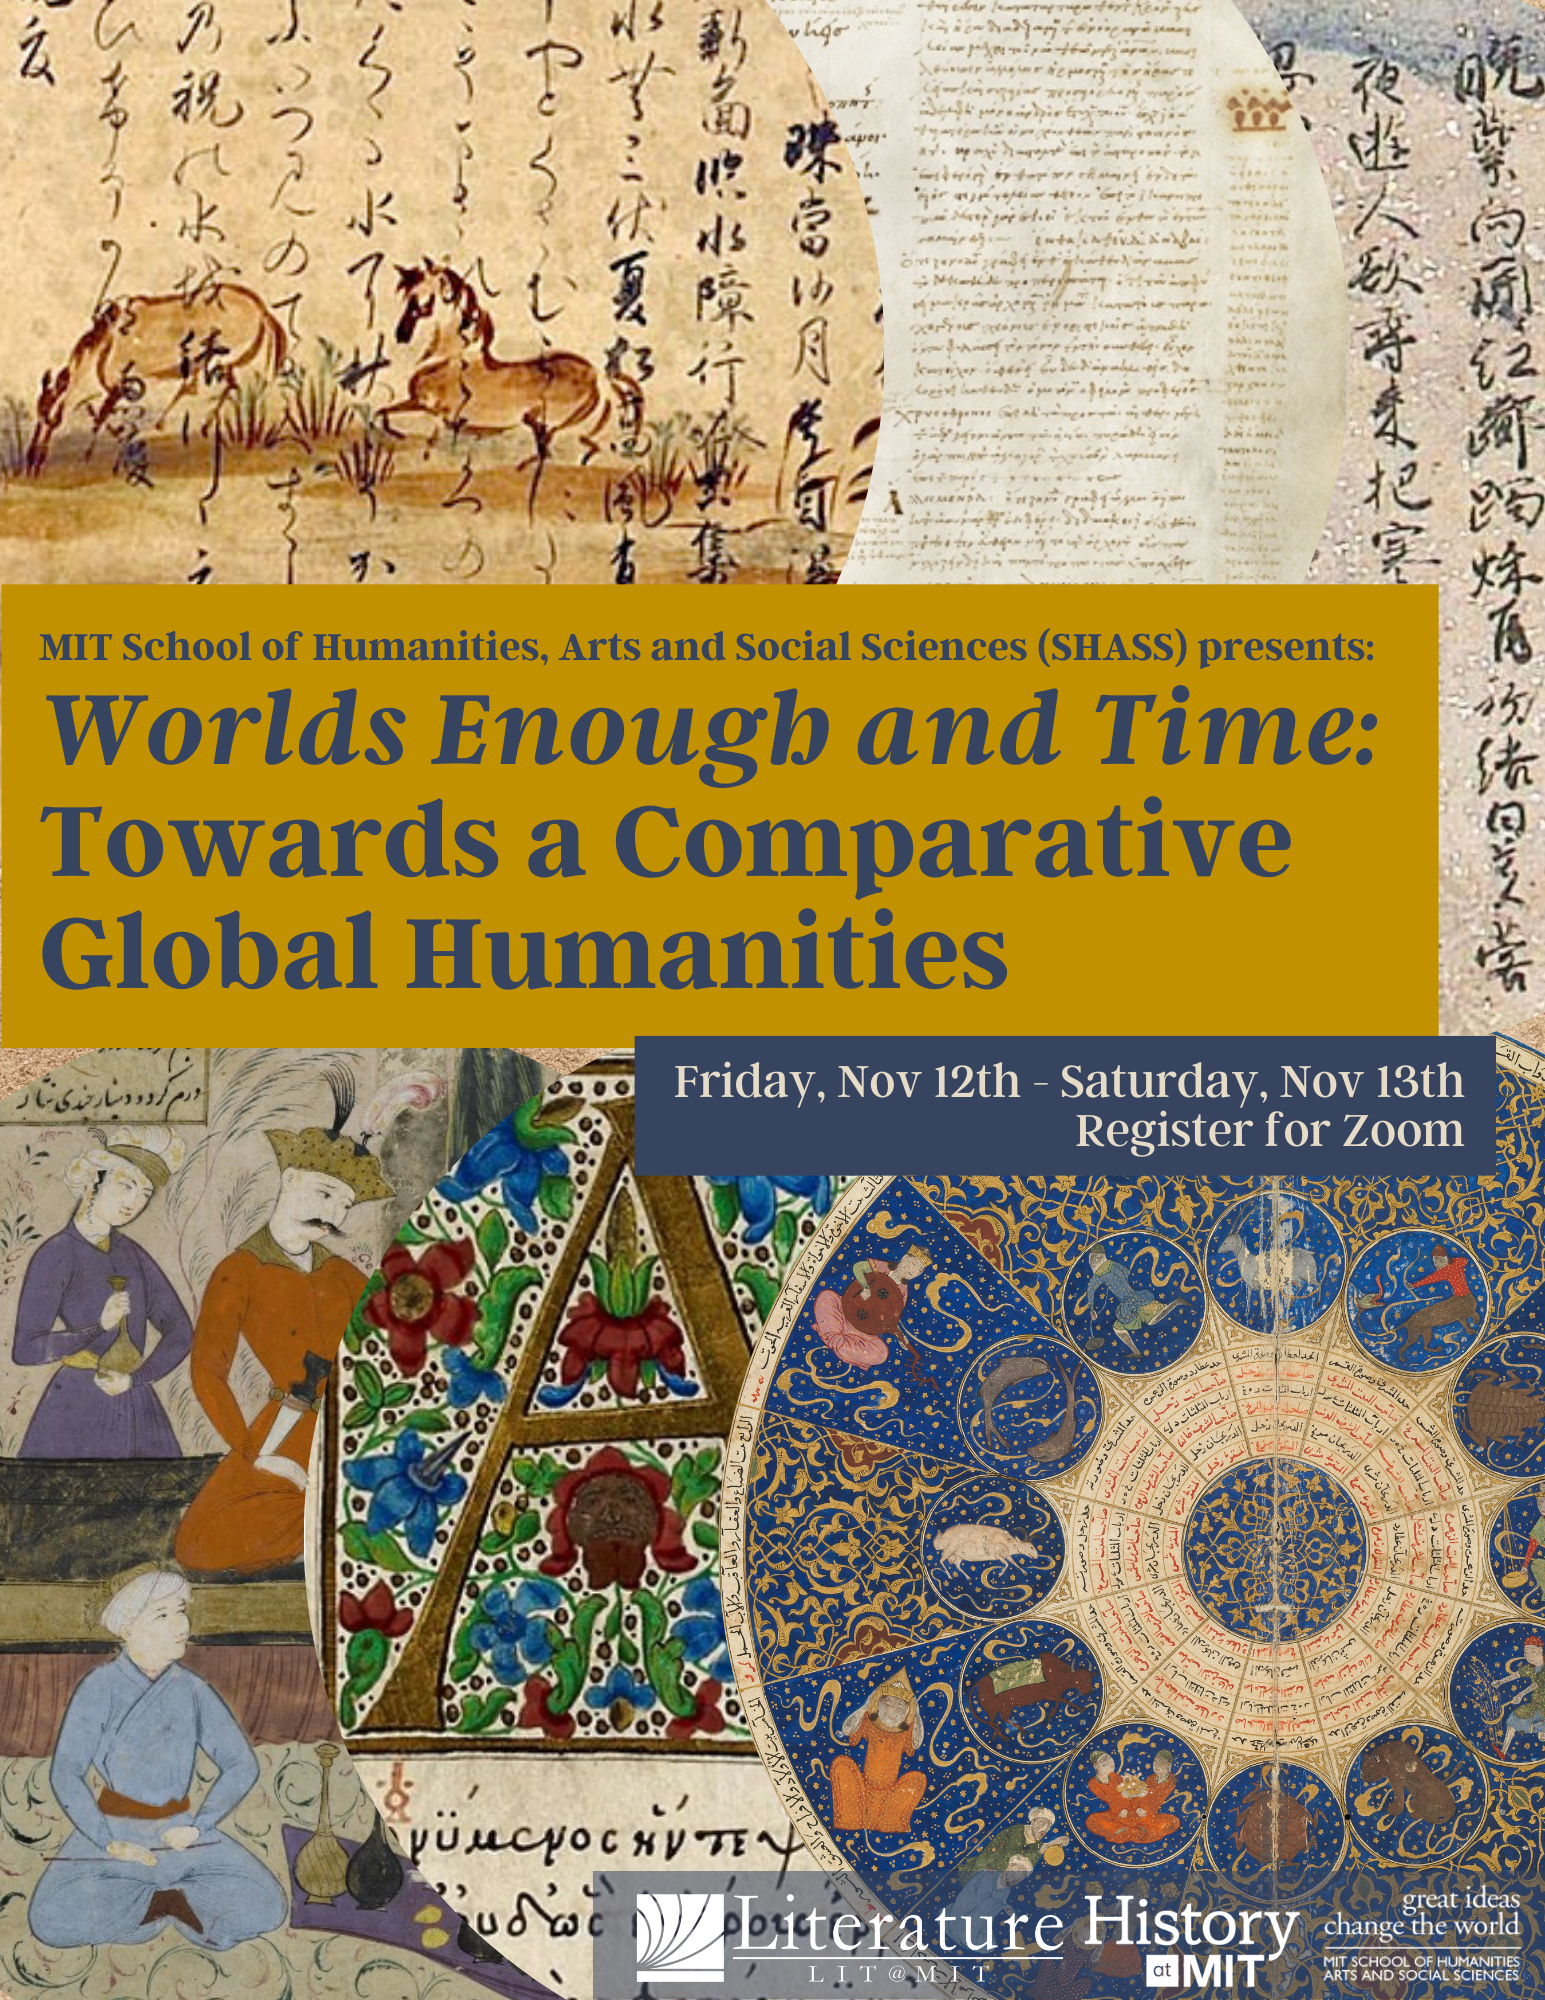 Worlds Enough and Time: Towards a Comparative Global Humanities